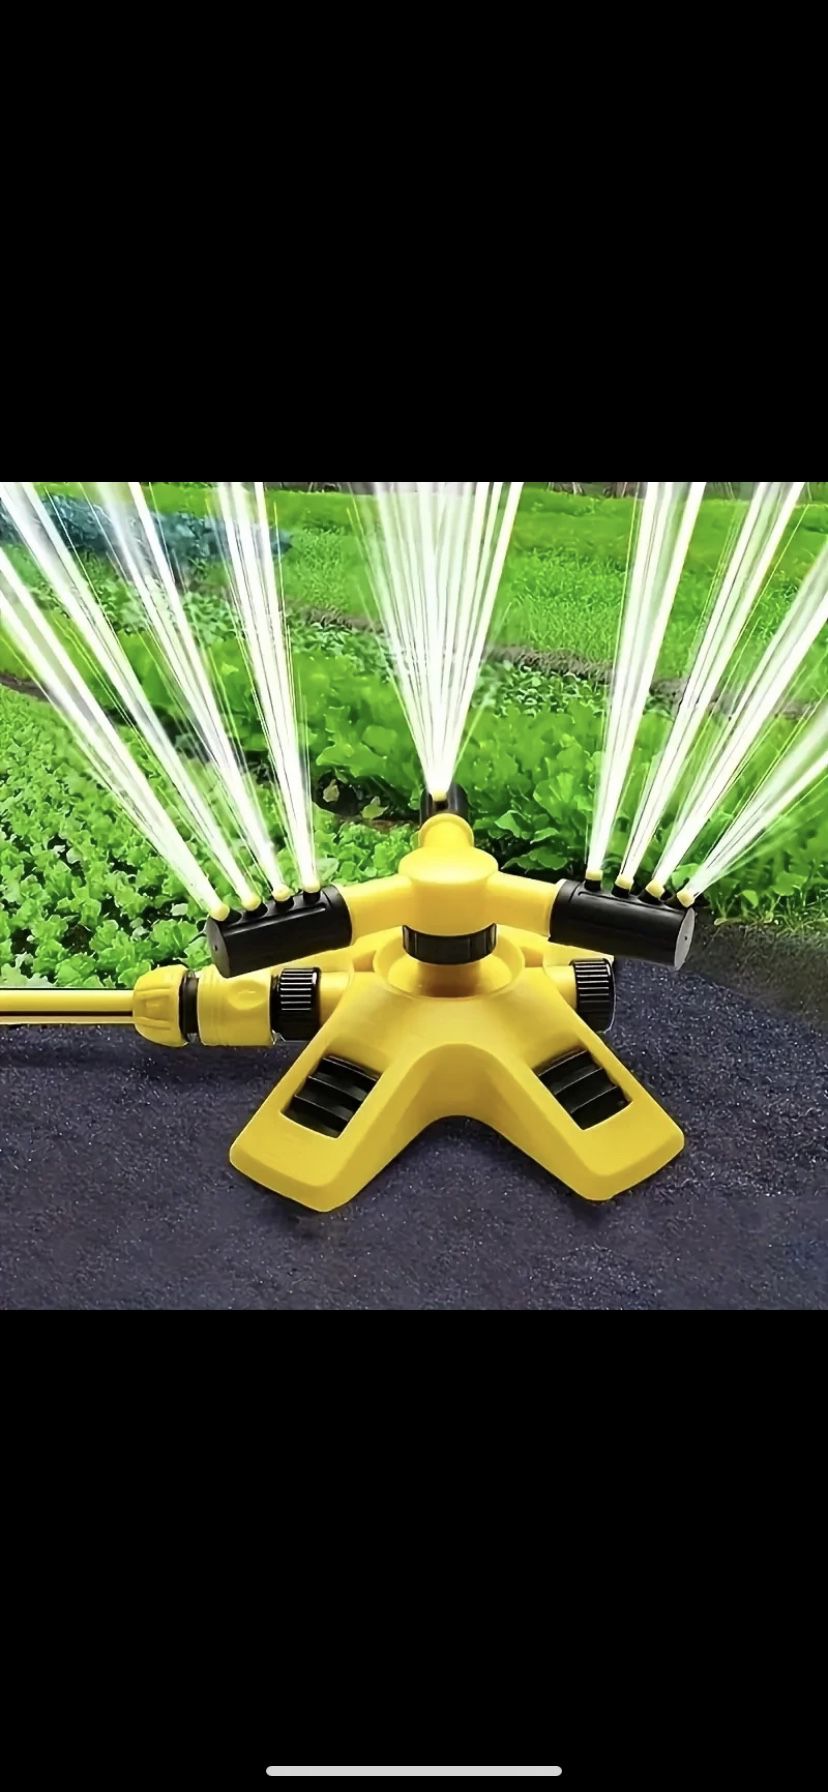 Upgrade Your Garden With This 360° Rotating Plastic Sprinkler - Perfect for Irrigation And Outdoor Watering!